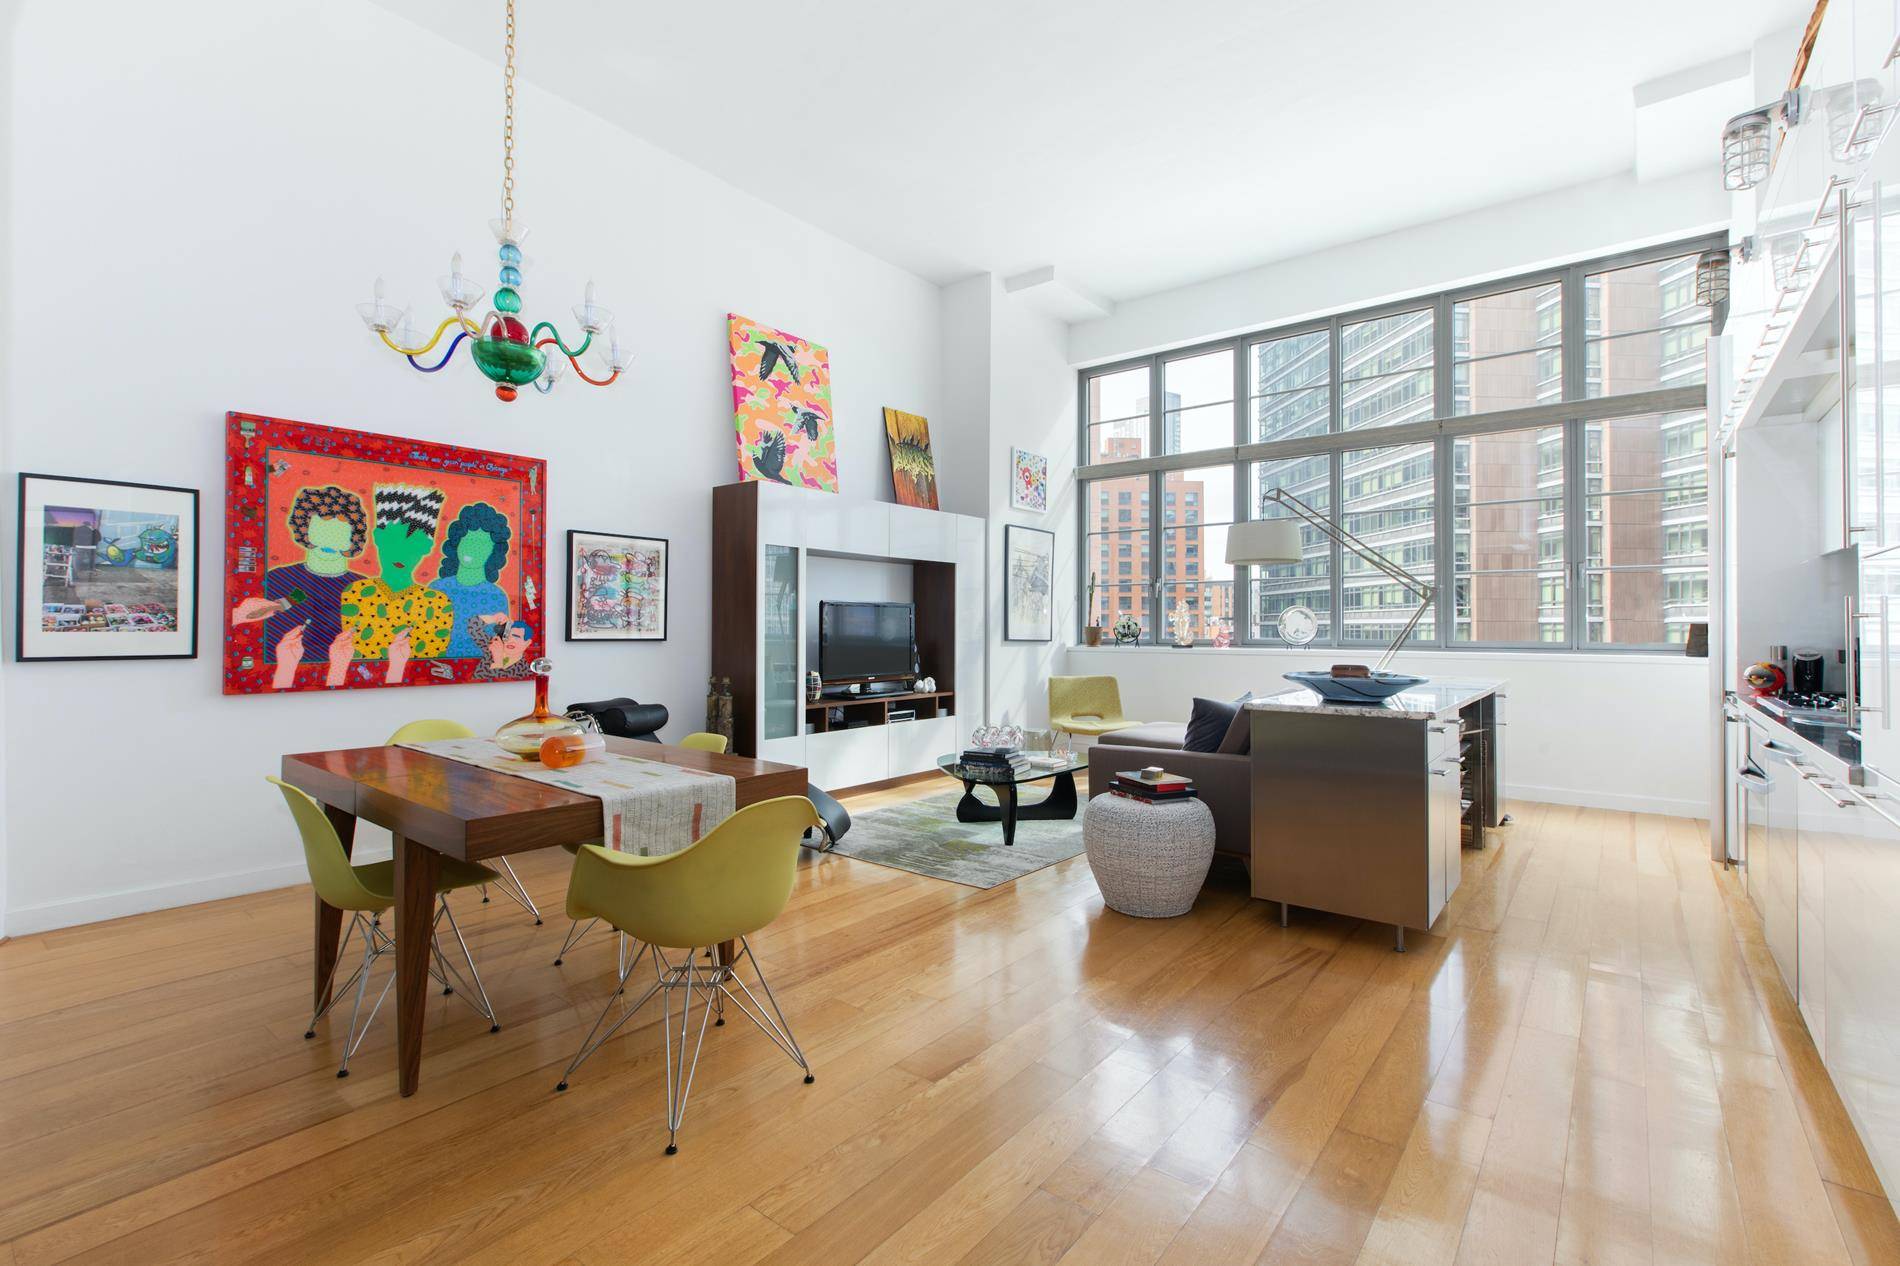 SPECTACULAR 1, 324 SQ FT LOFT IN LONG ISLAND CITY, BATHED IN NATURAL LIGHT AND BRIMMING WITH HIGH END DETAILS !